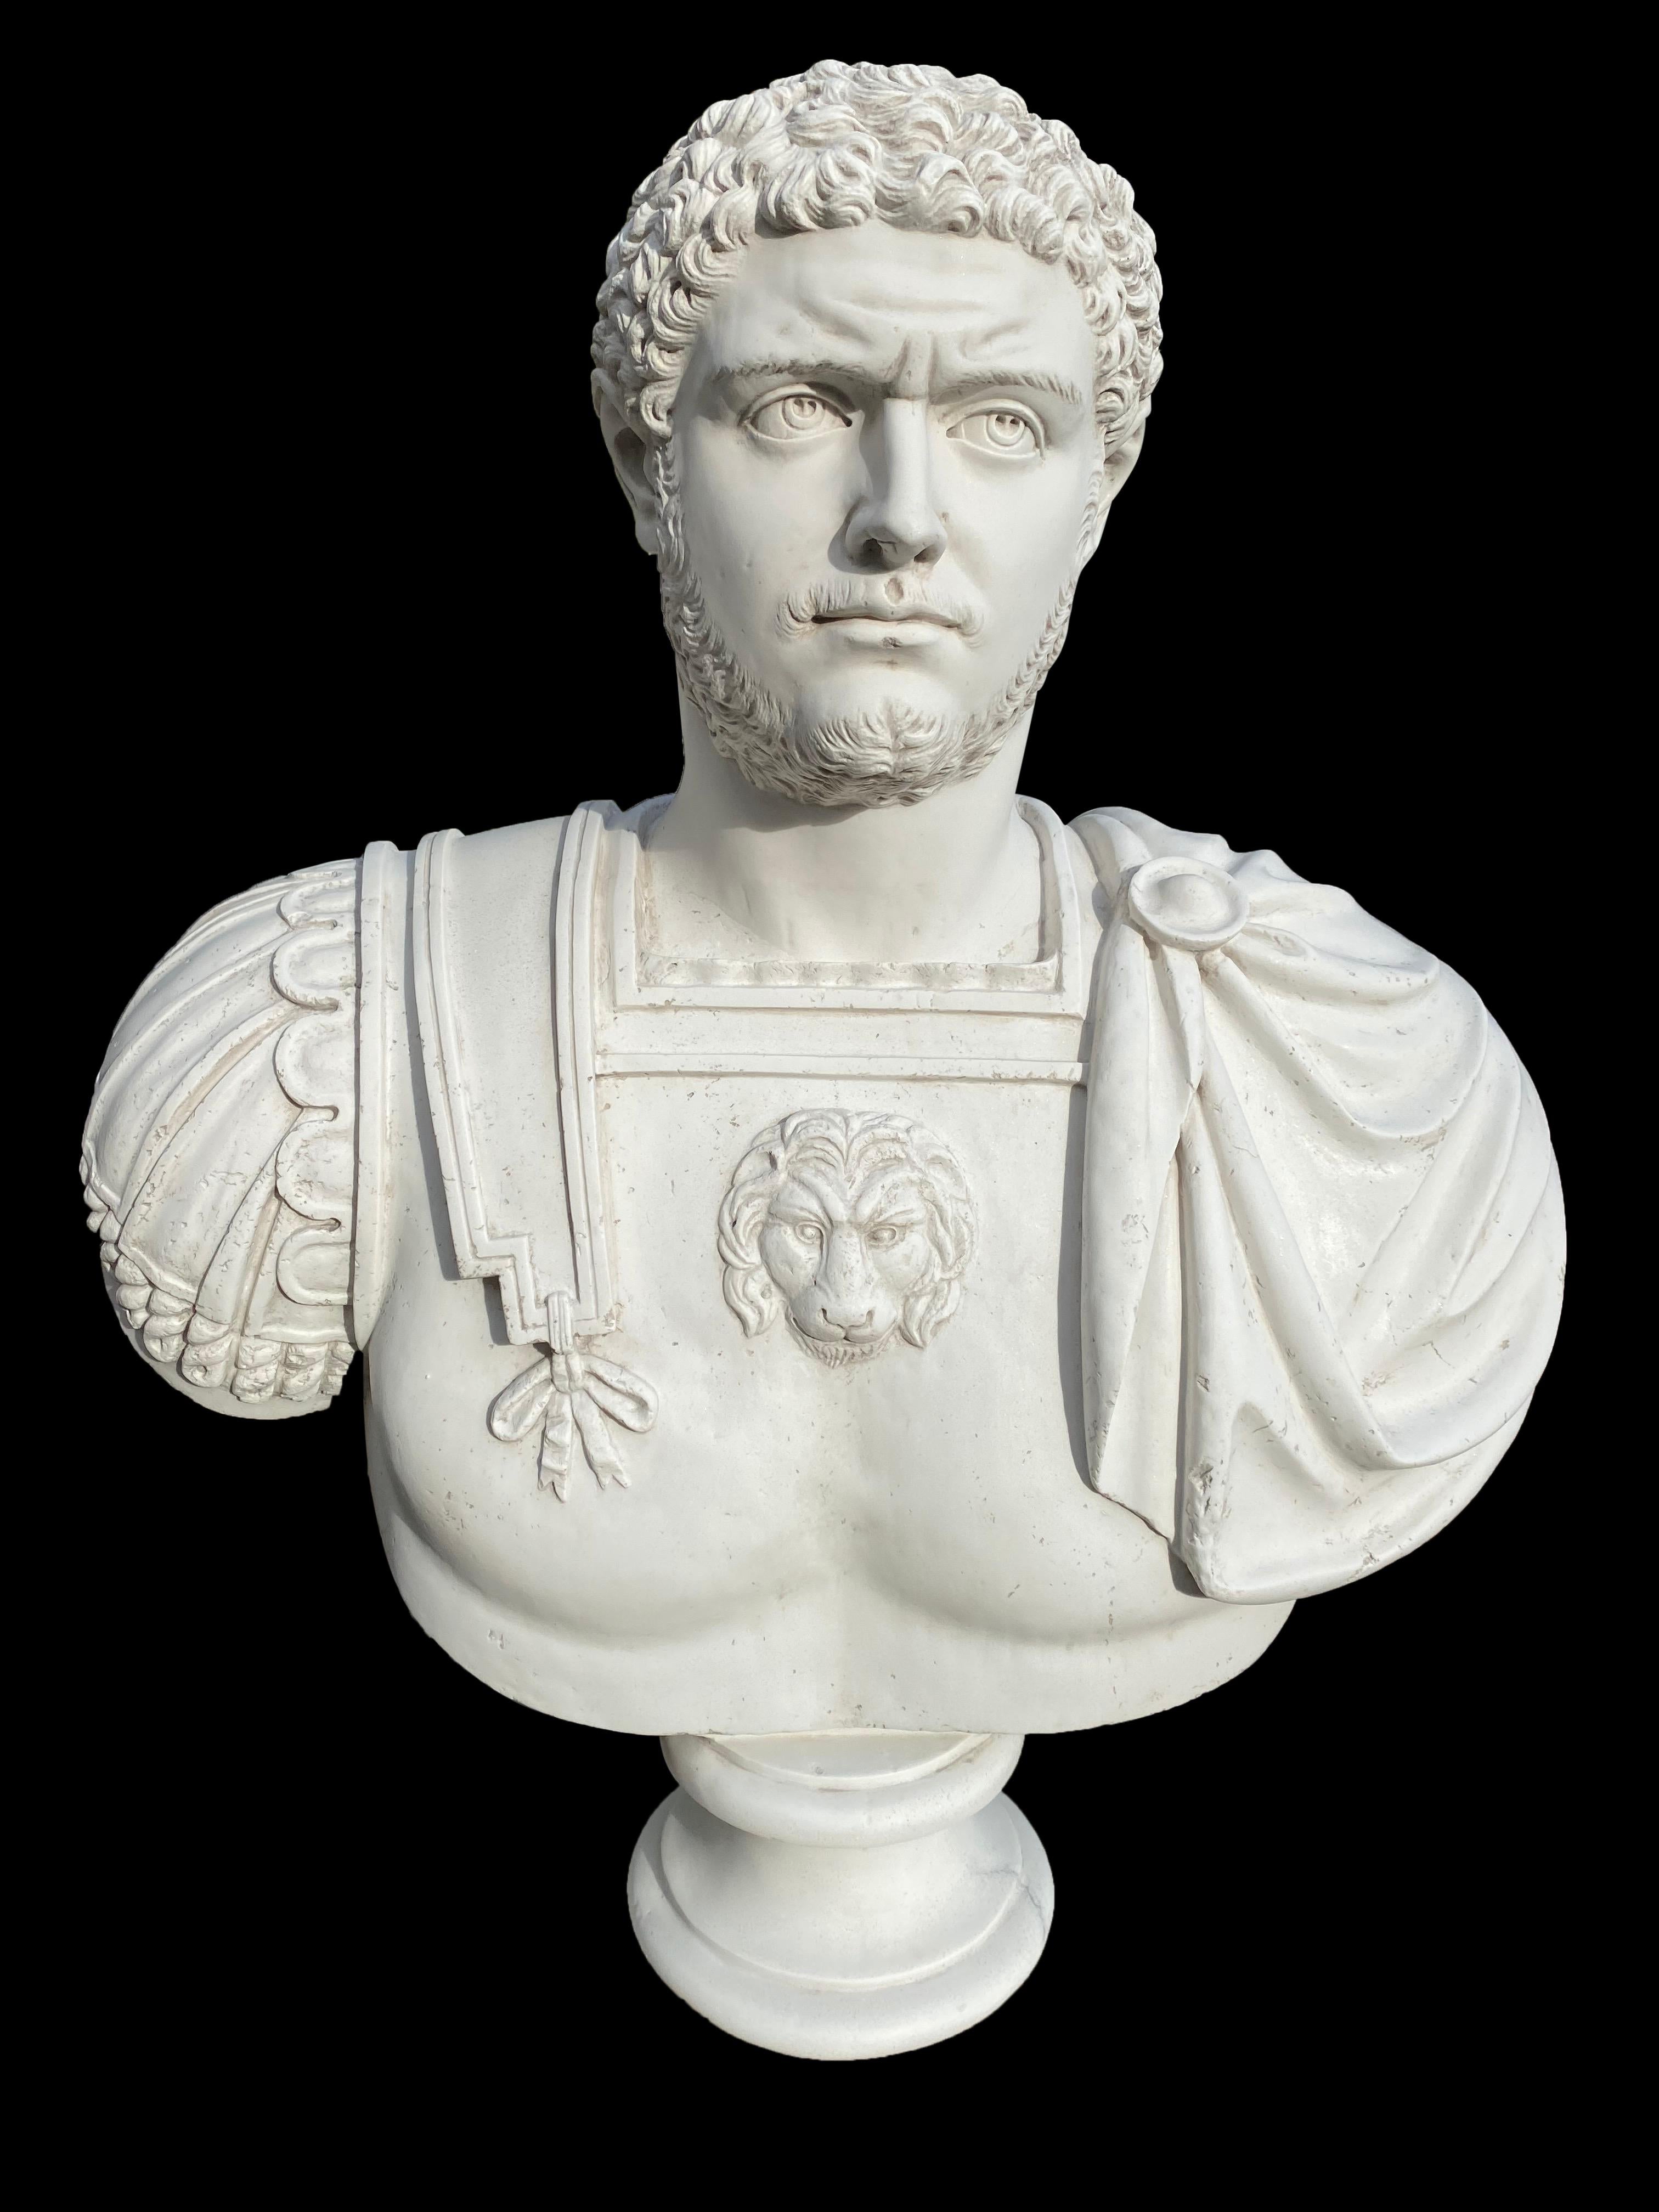 Caracalla Roman Emperor Grand Tour bust sculpture, 20th century.

This bust of Caracalla depicts him as a powerful man, of the large stature he was, and was purchased by a large English estate, from a 18th century Italian studio, later sold in